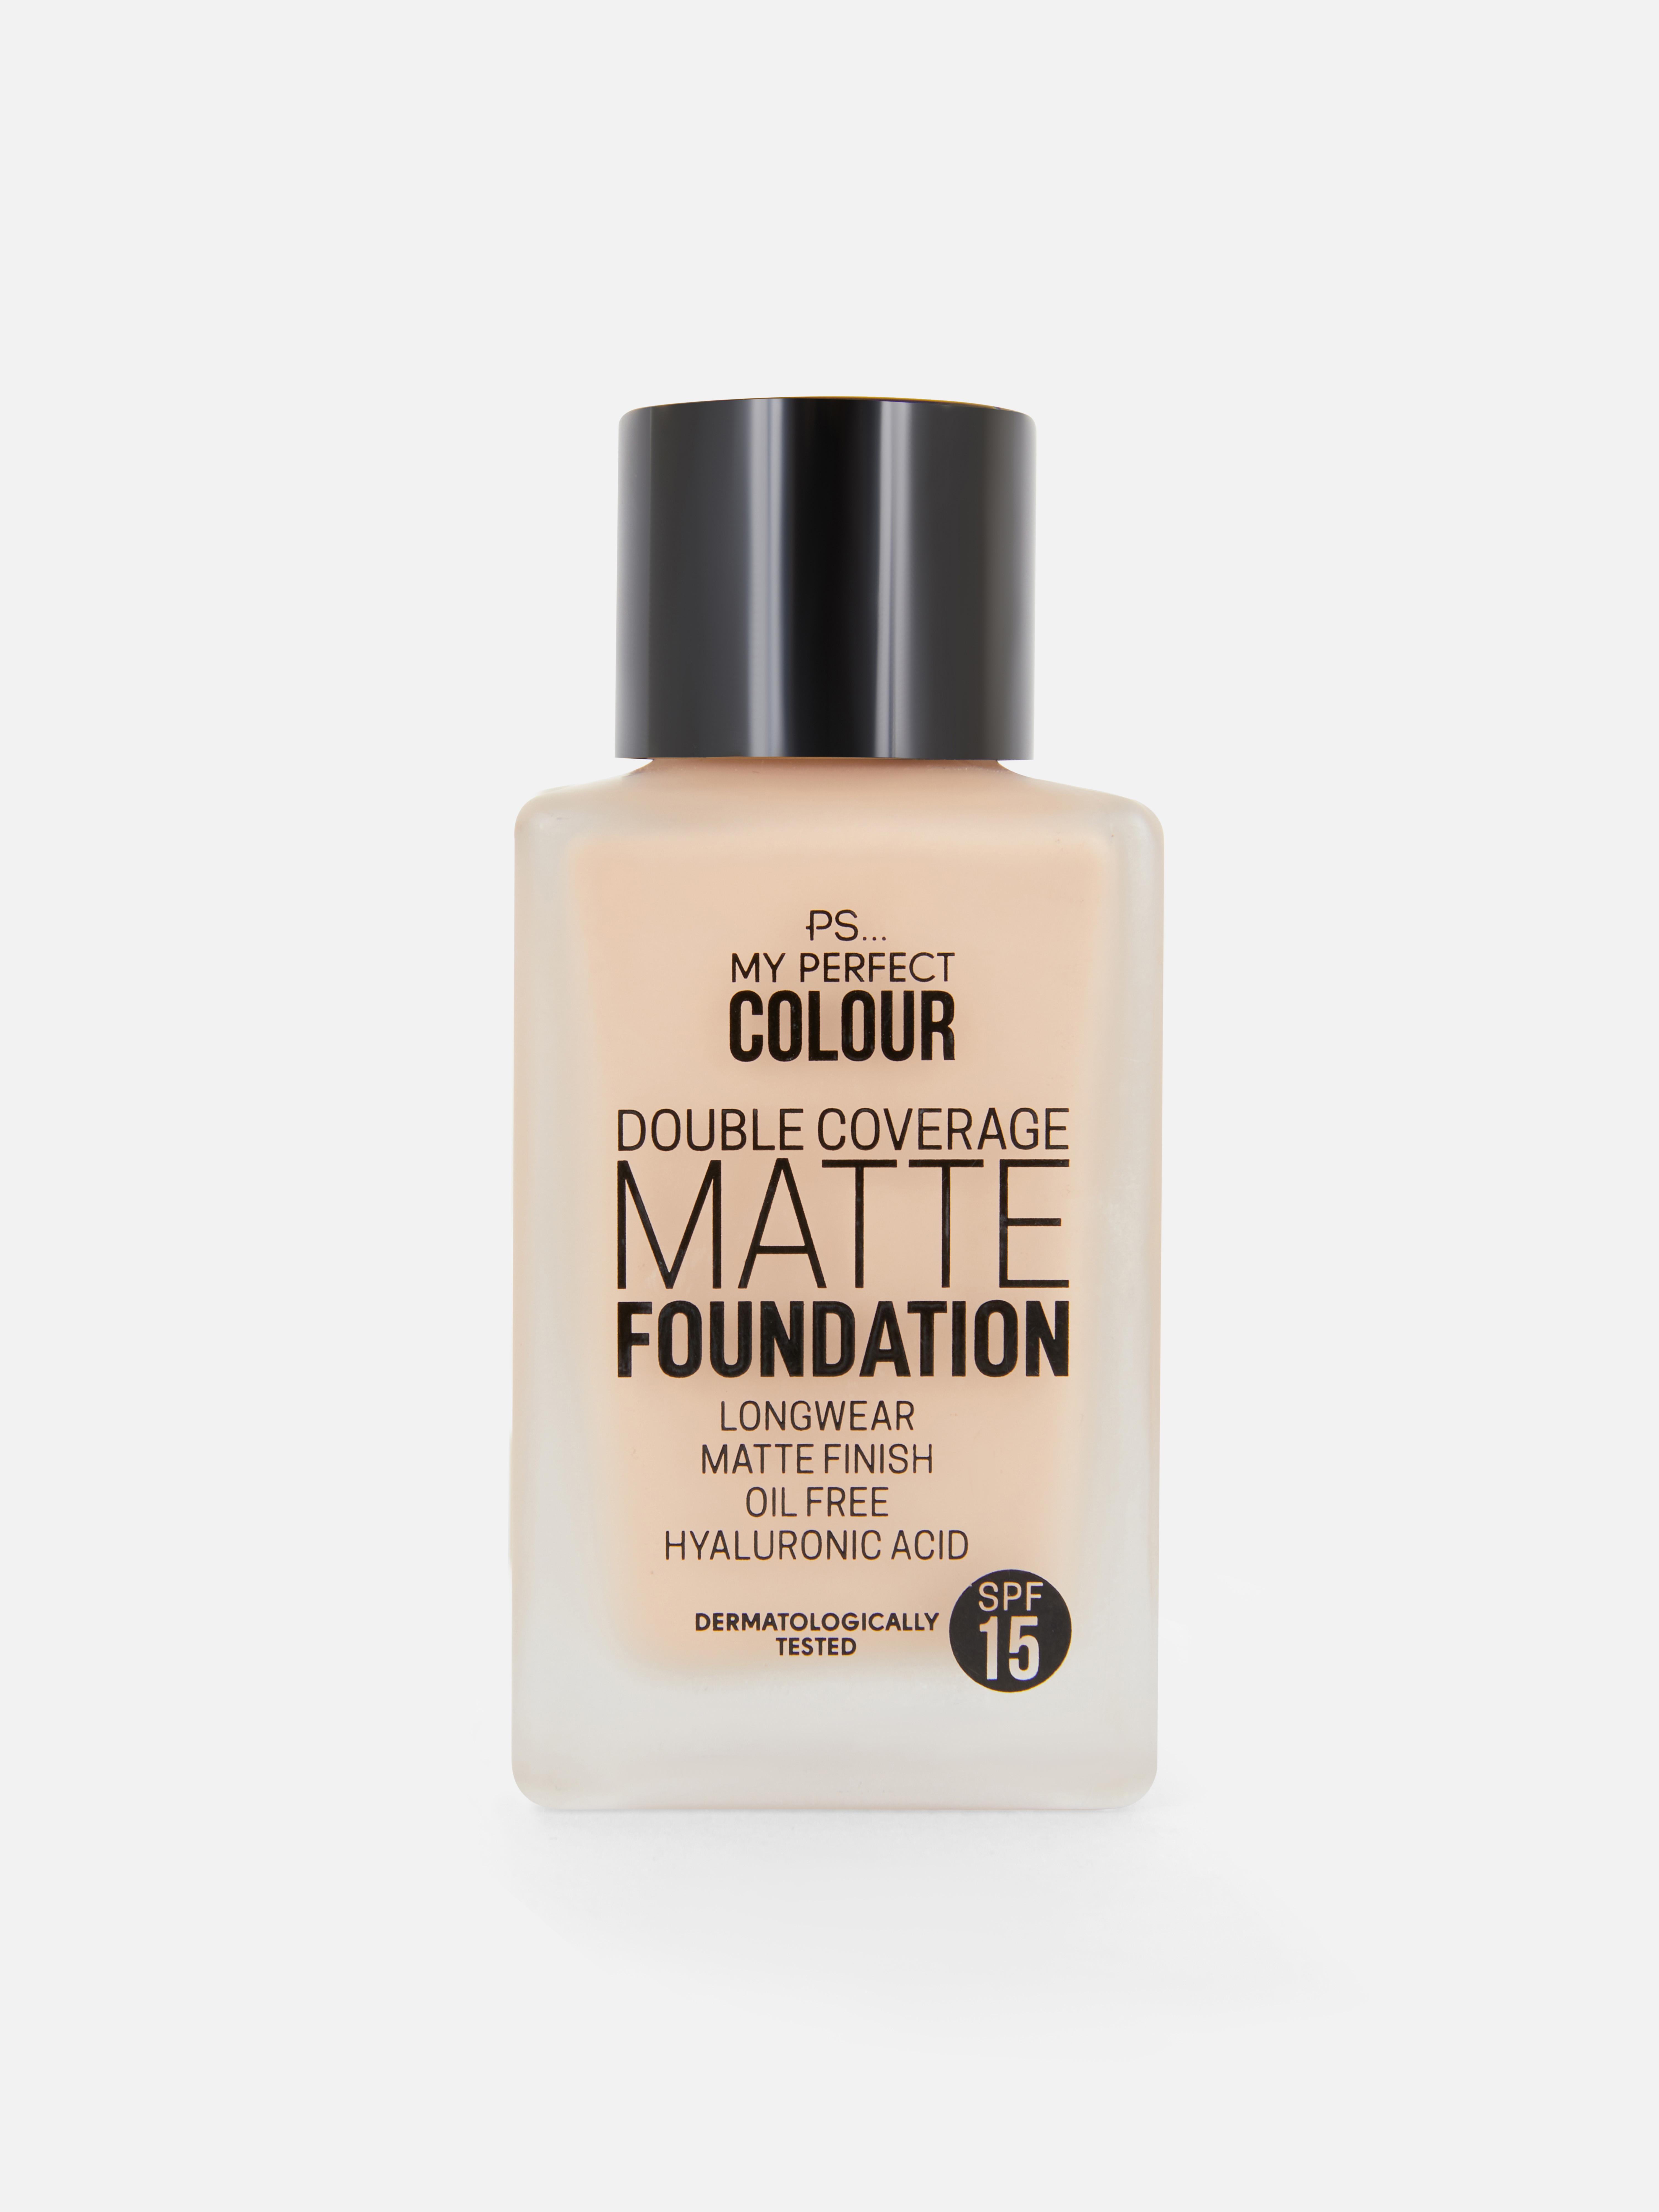 PS... My Perfect Colour Double Coverage Matte Foundation